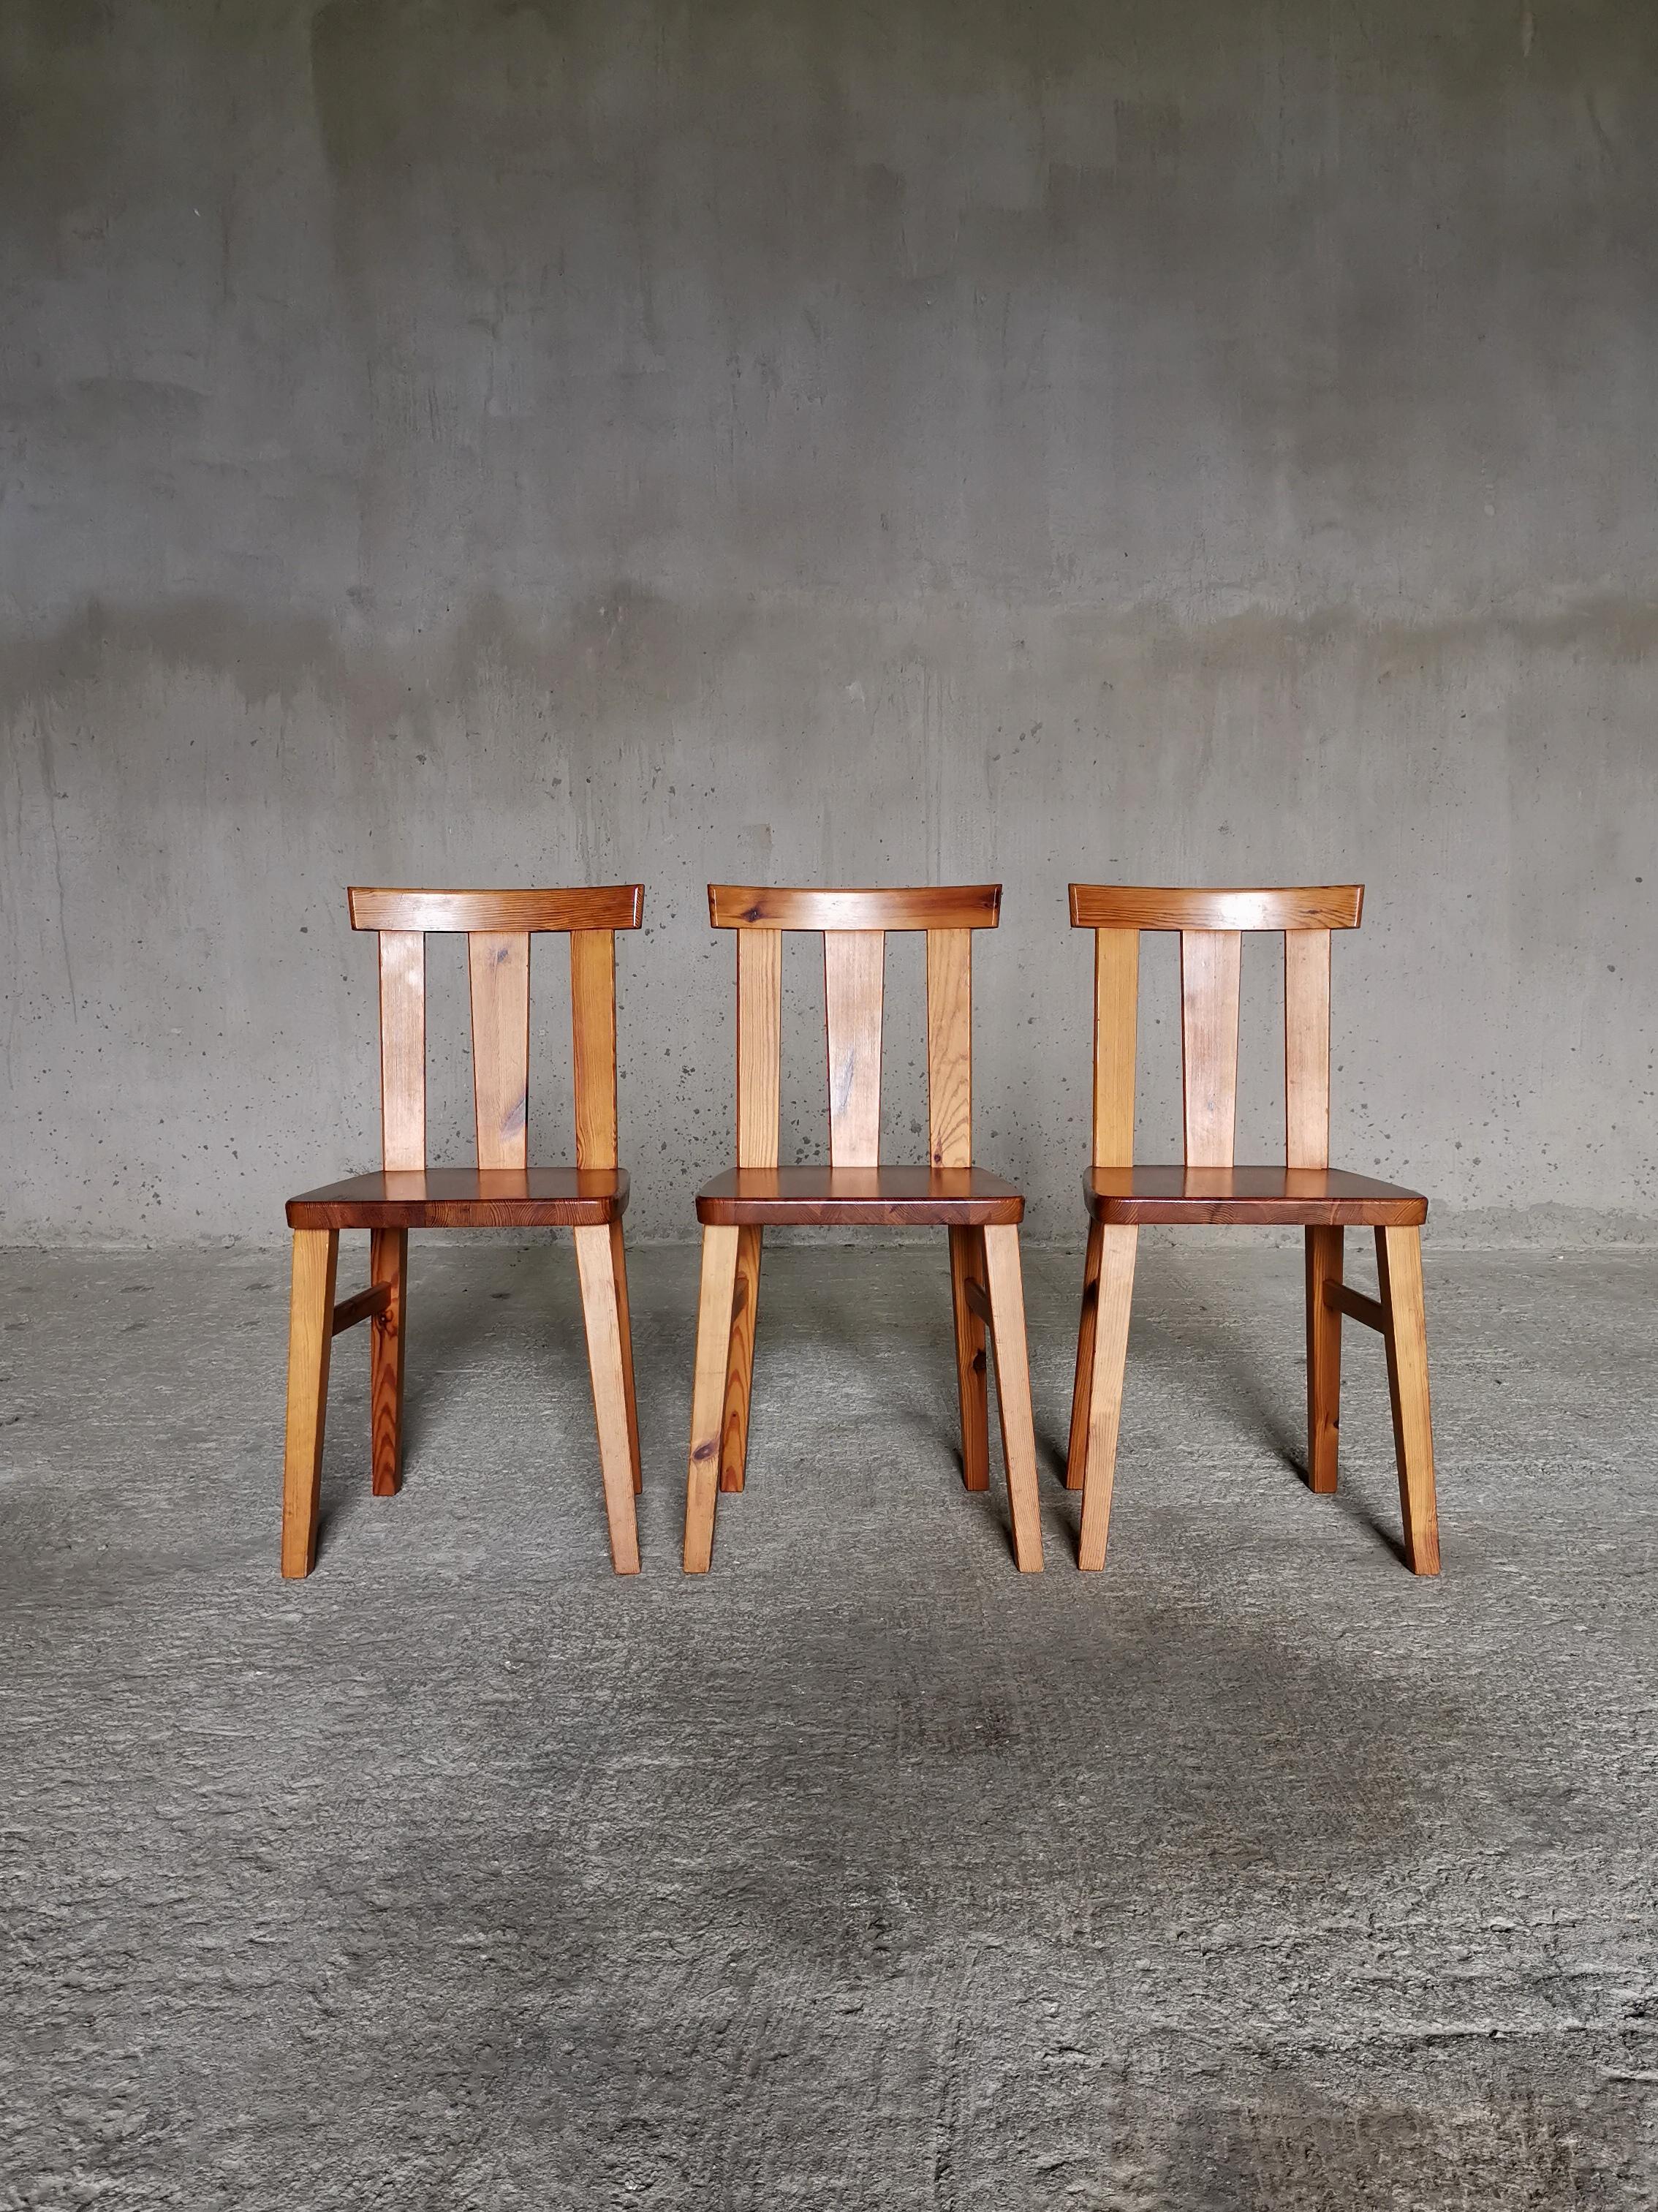 Set of 3 dining chairs in solid pine, style of Axel Einar Hjorth's 